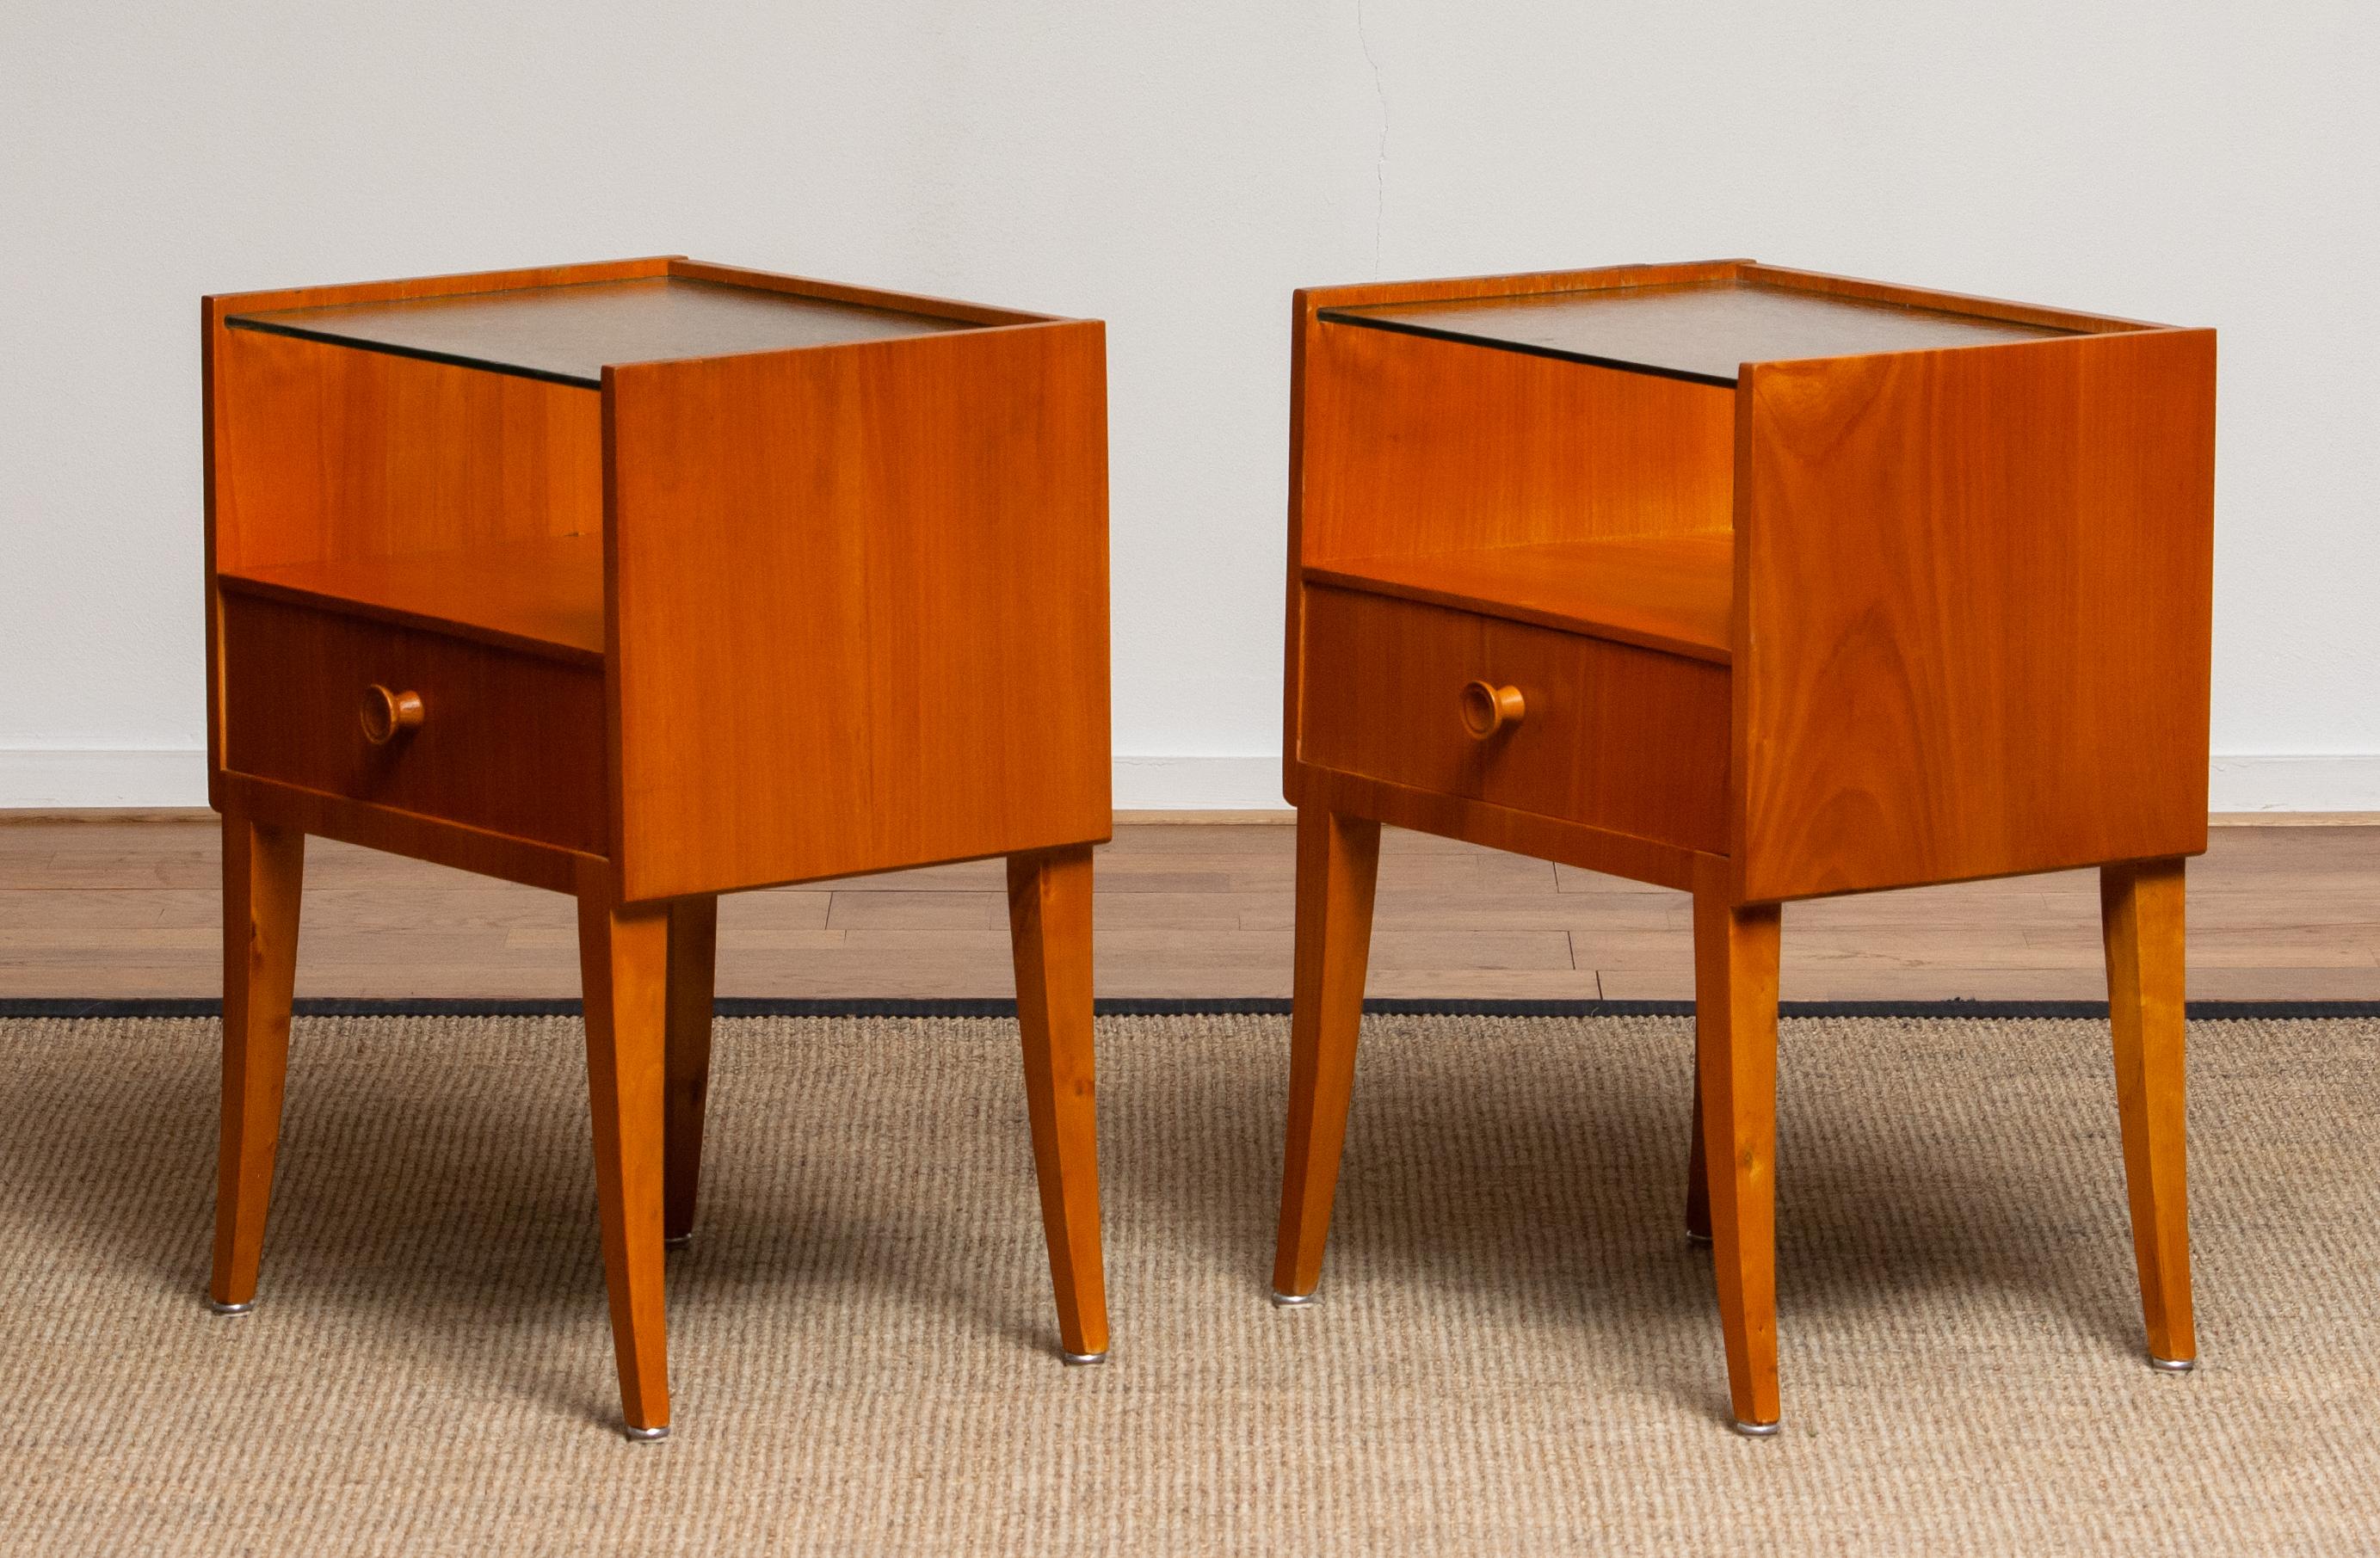 Mid-20th Century 1950s Pair of Nightstands or Bedside Tables from Sweden in Elm with Glass Top